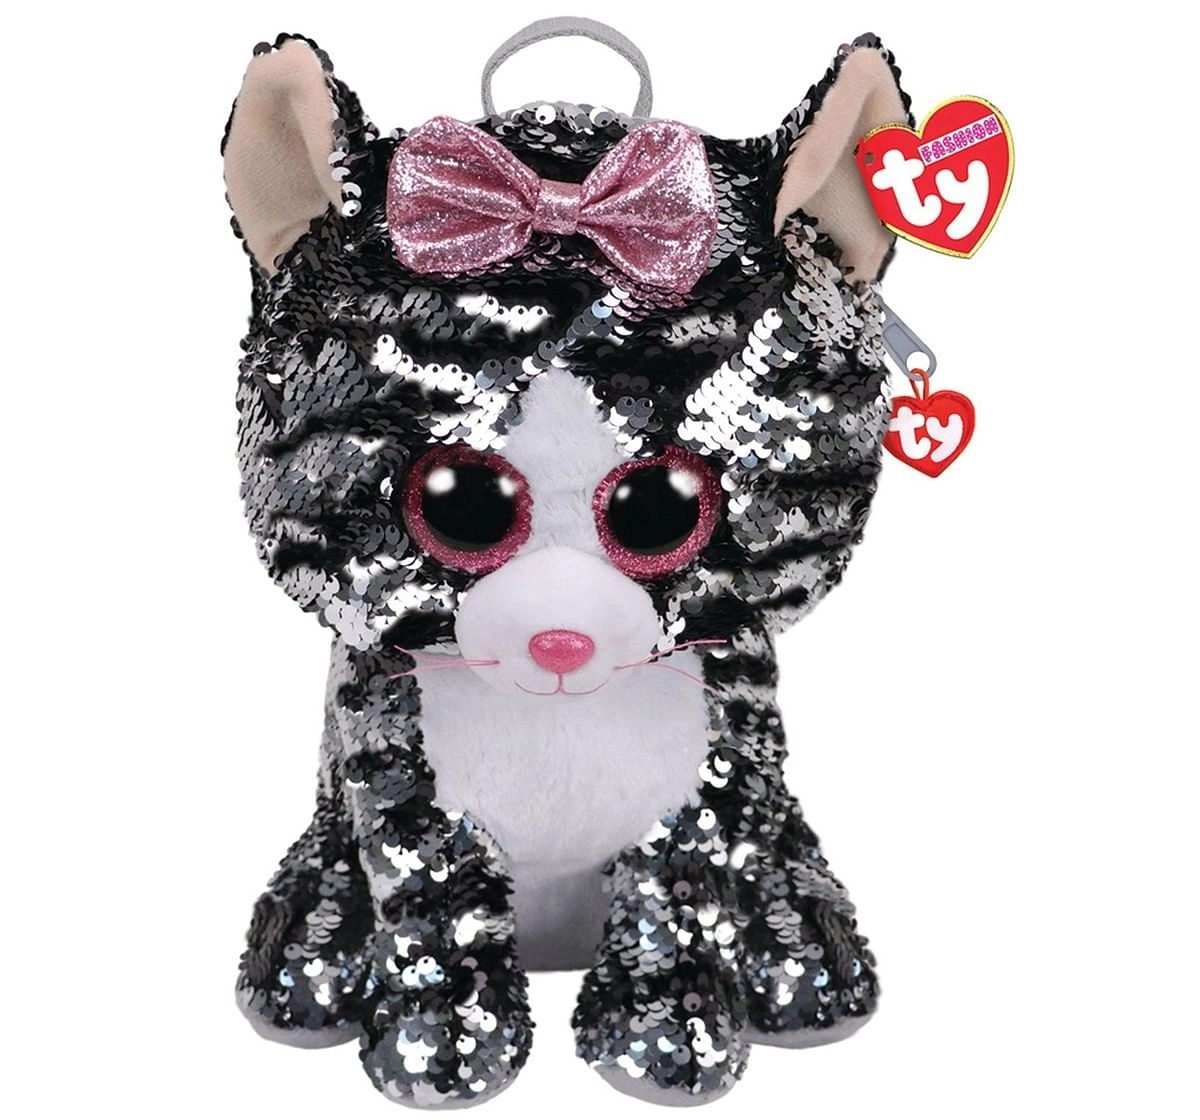 Ty KIKI - Sequin Backpack Plush Accessories for Kids age 3Y+ - 15 Cm 